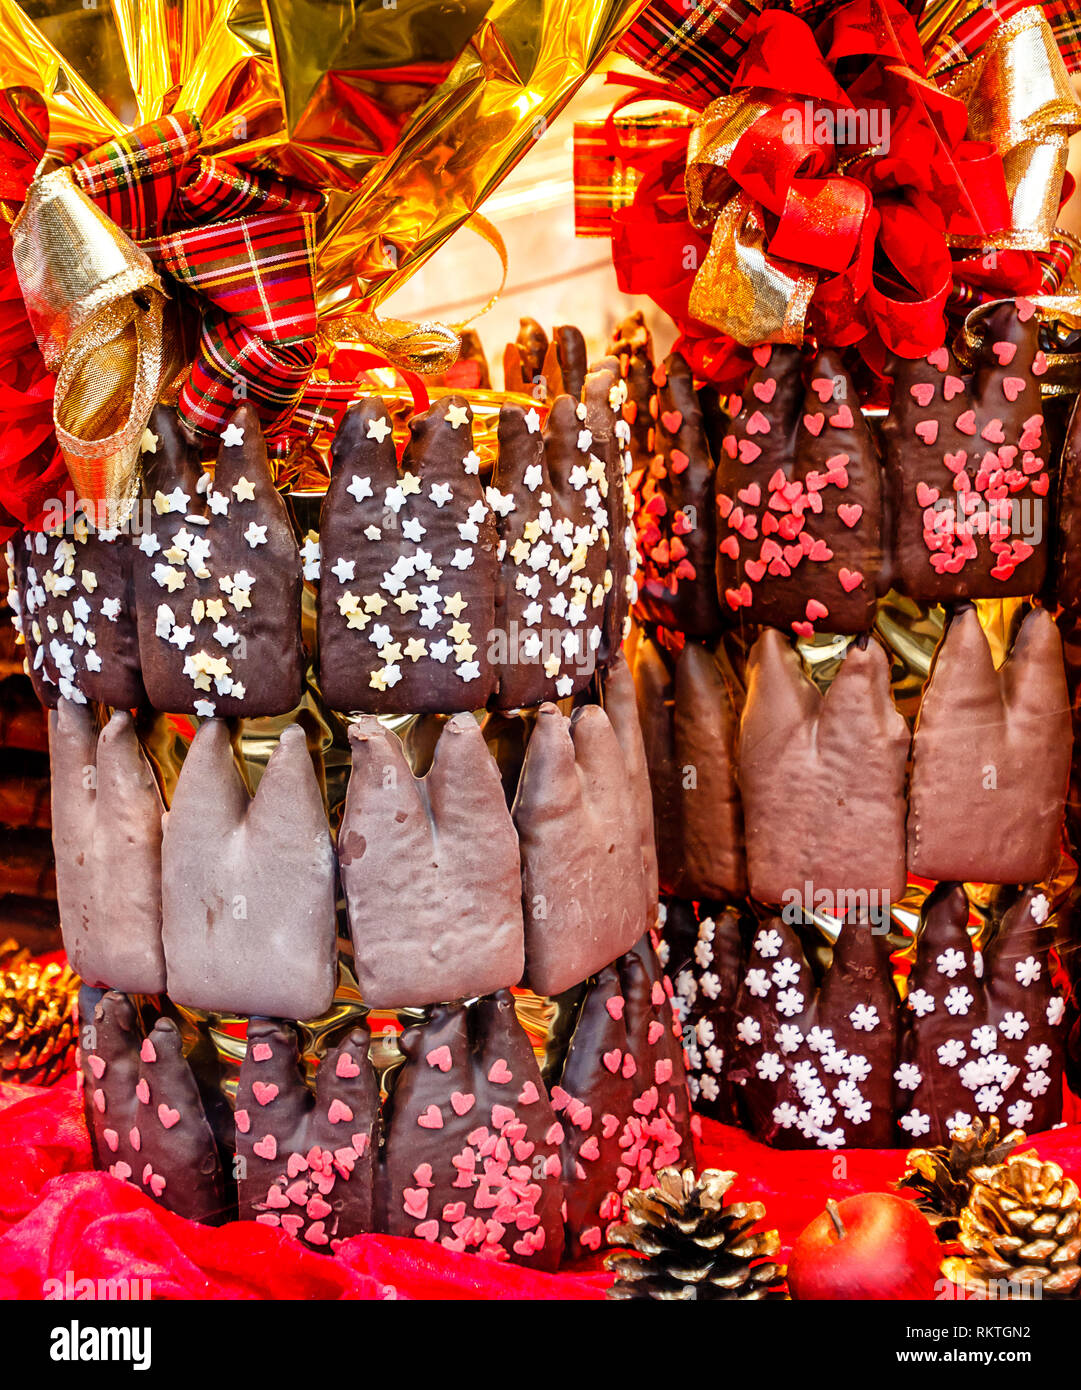 Cologne Cathedral shaped Gingerbread (german “Koelner Doemchen”) with chocolate icing on the Christmas market in Cologne, Germany Stock Photo